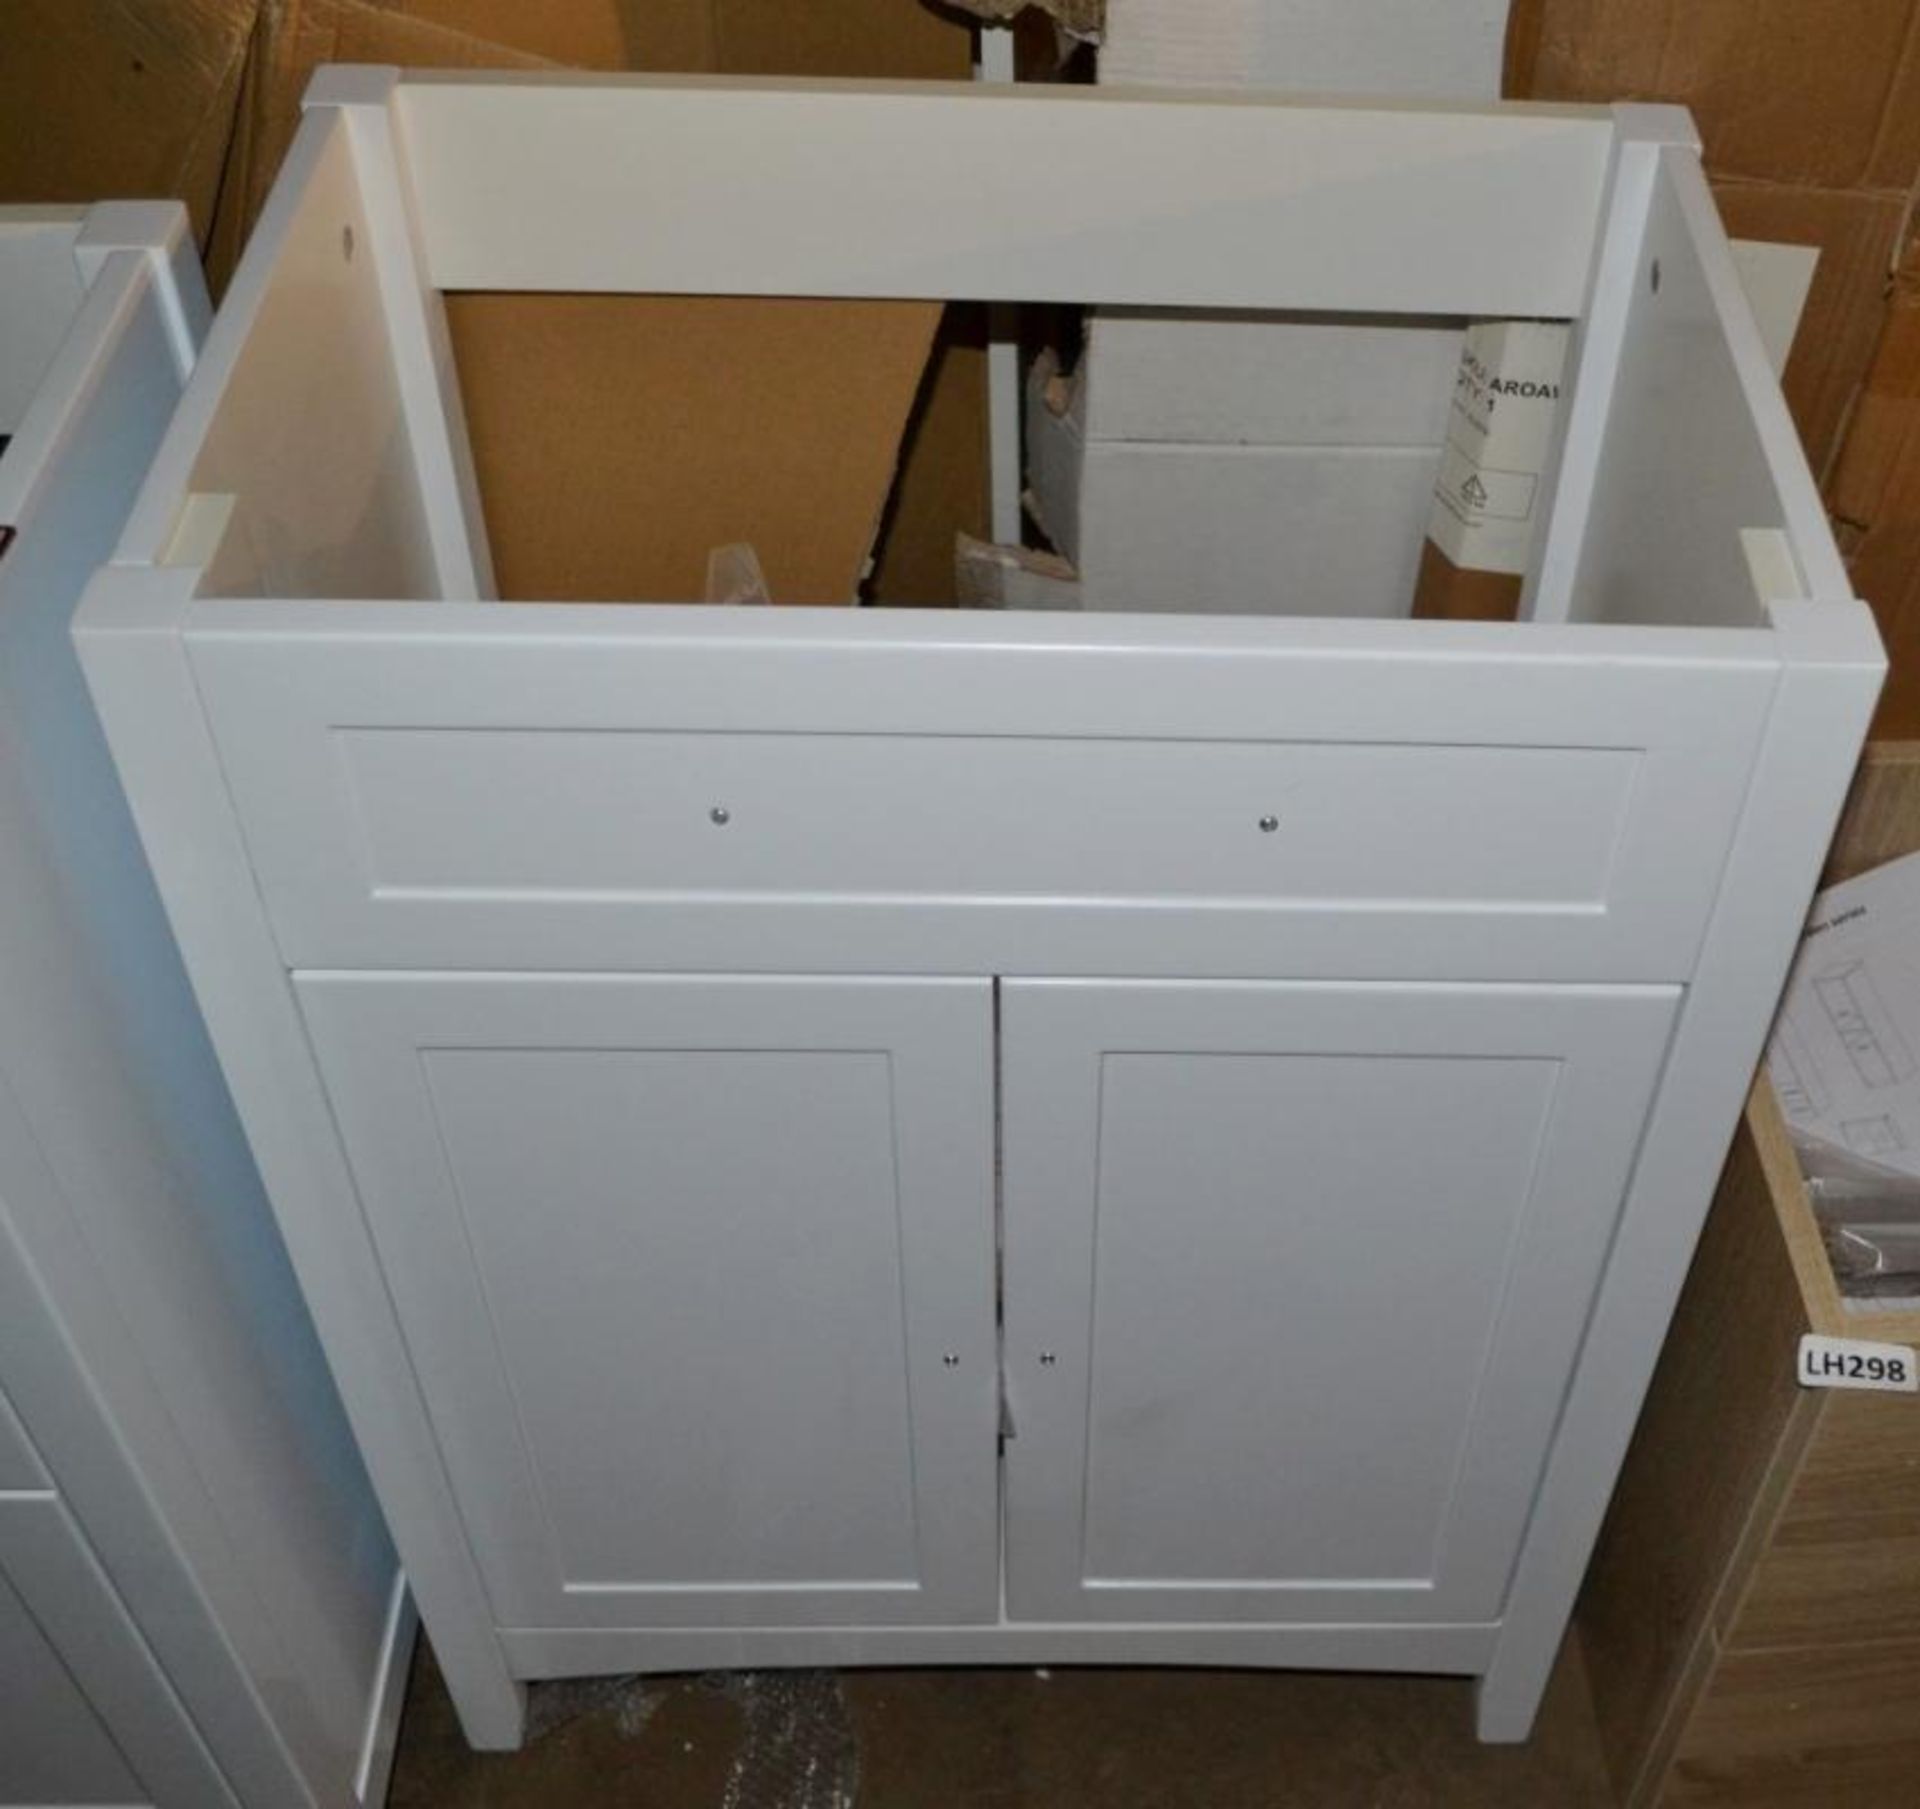 1 x Camberley 600 2-Drawer Soft Close Vanity Unit In White - New / Unused Stock - Dimensions: W60 x - Image 5 of 6